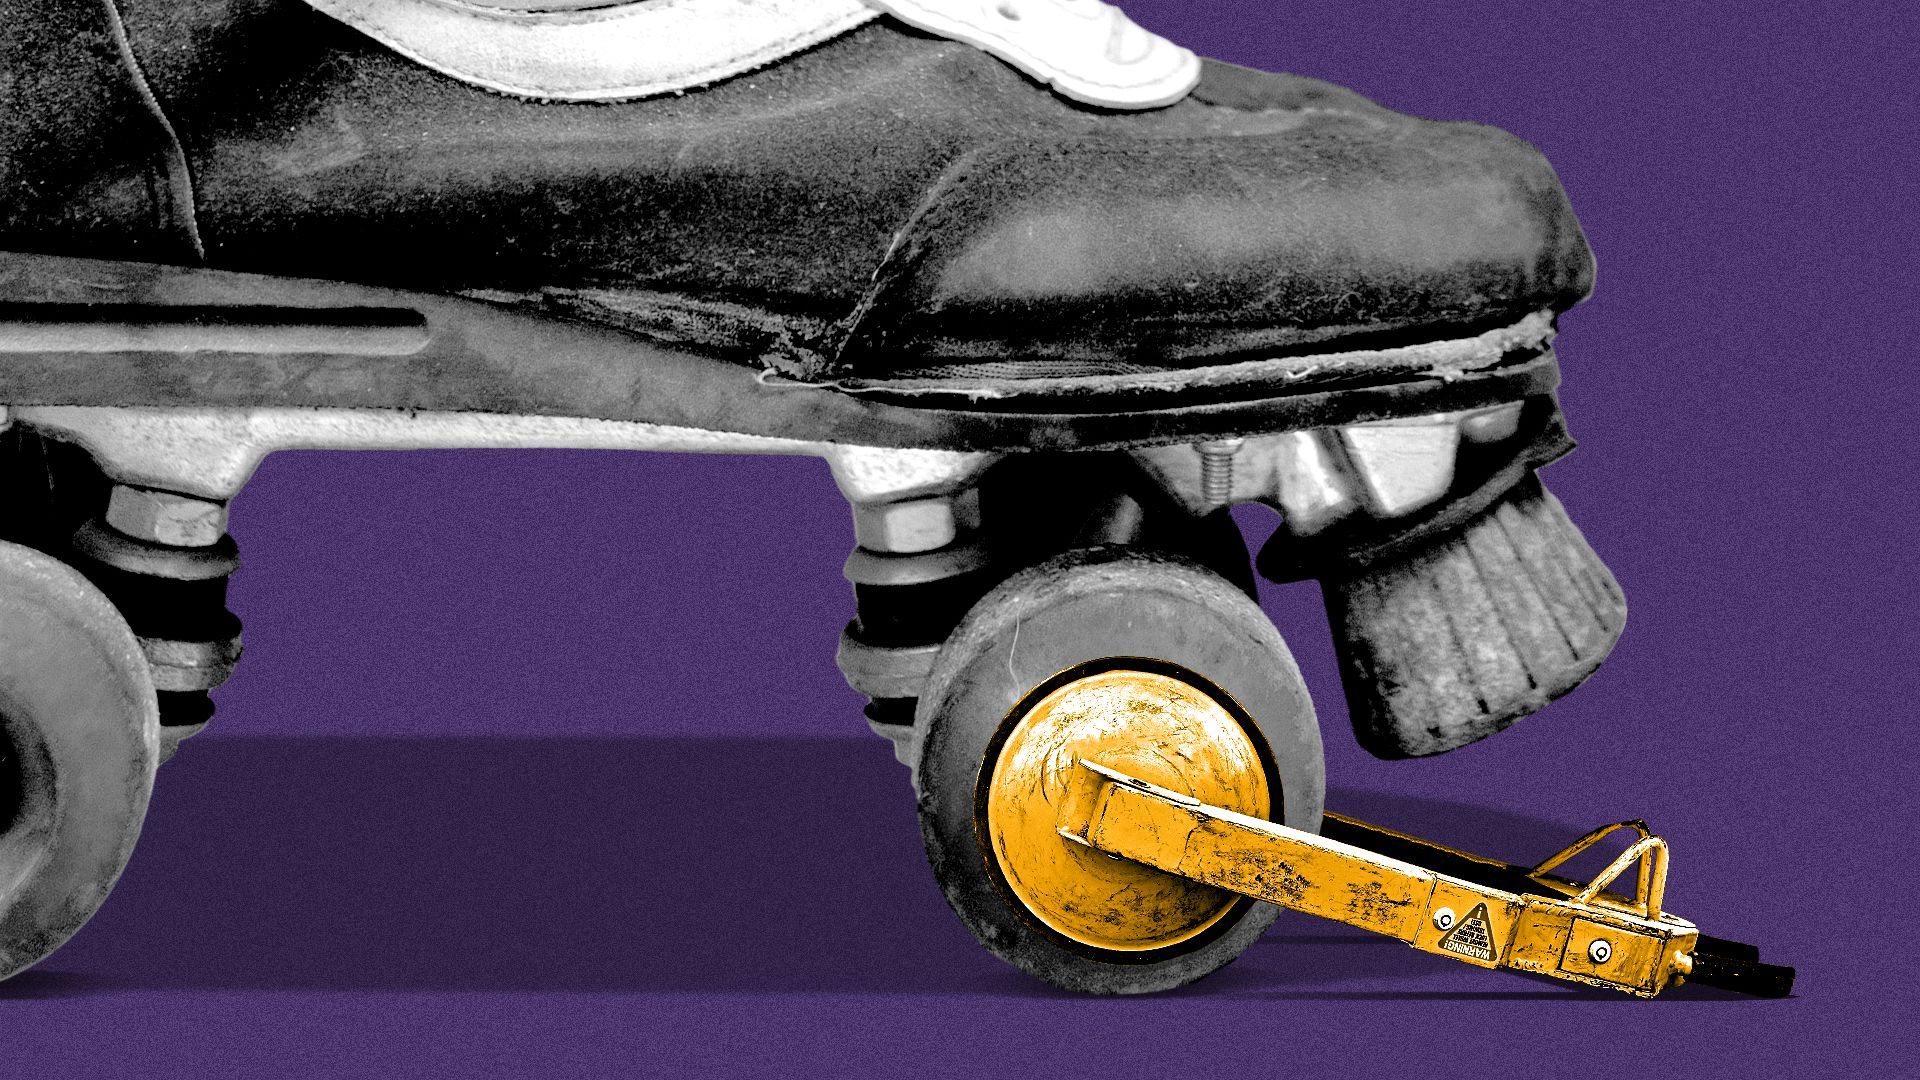 Illustration of a roller skate with a wheel clamp or boot on the front right wheel.